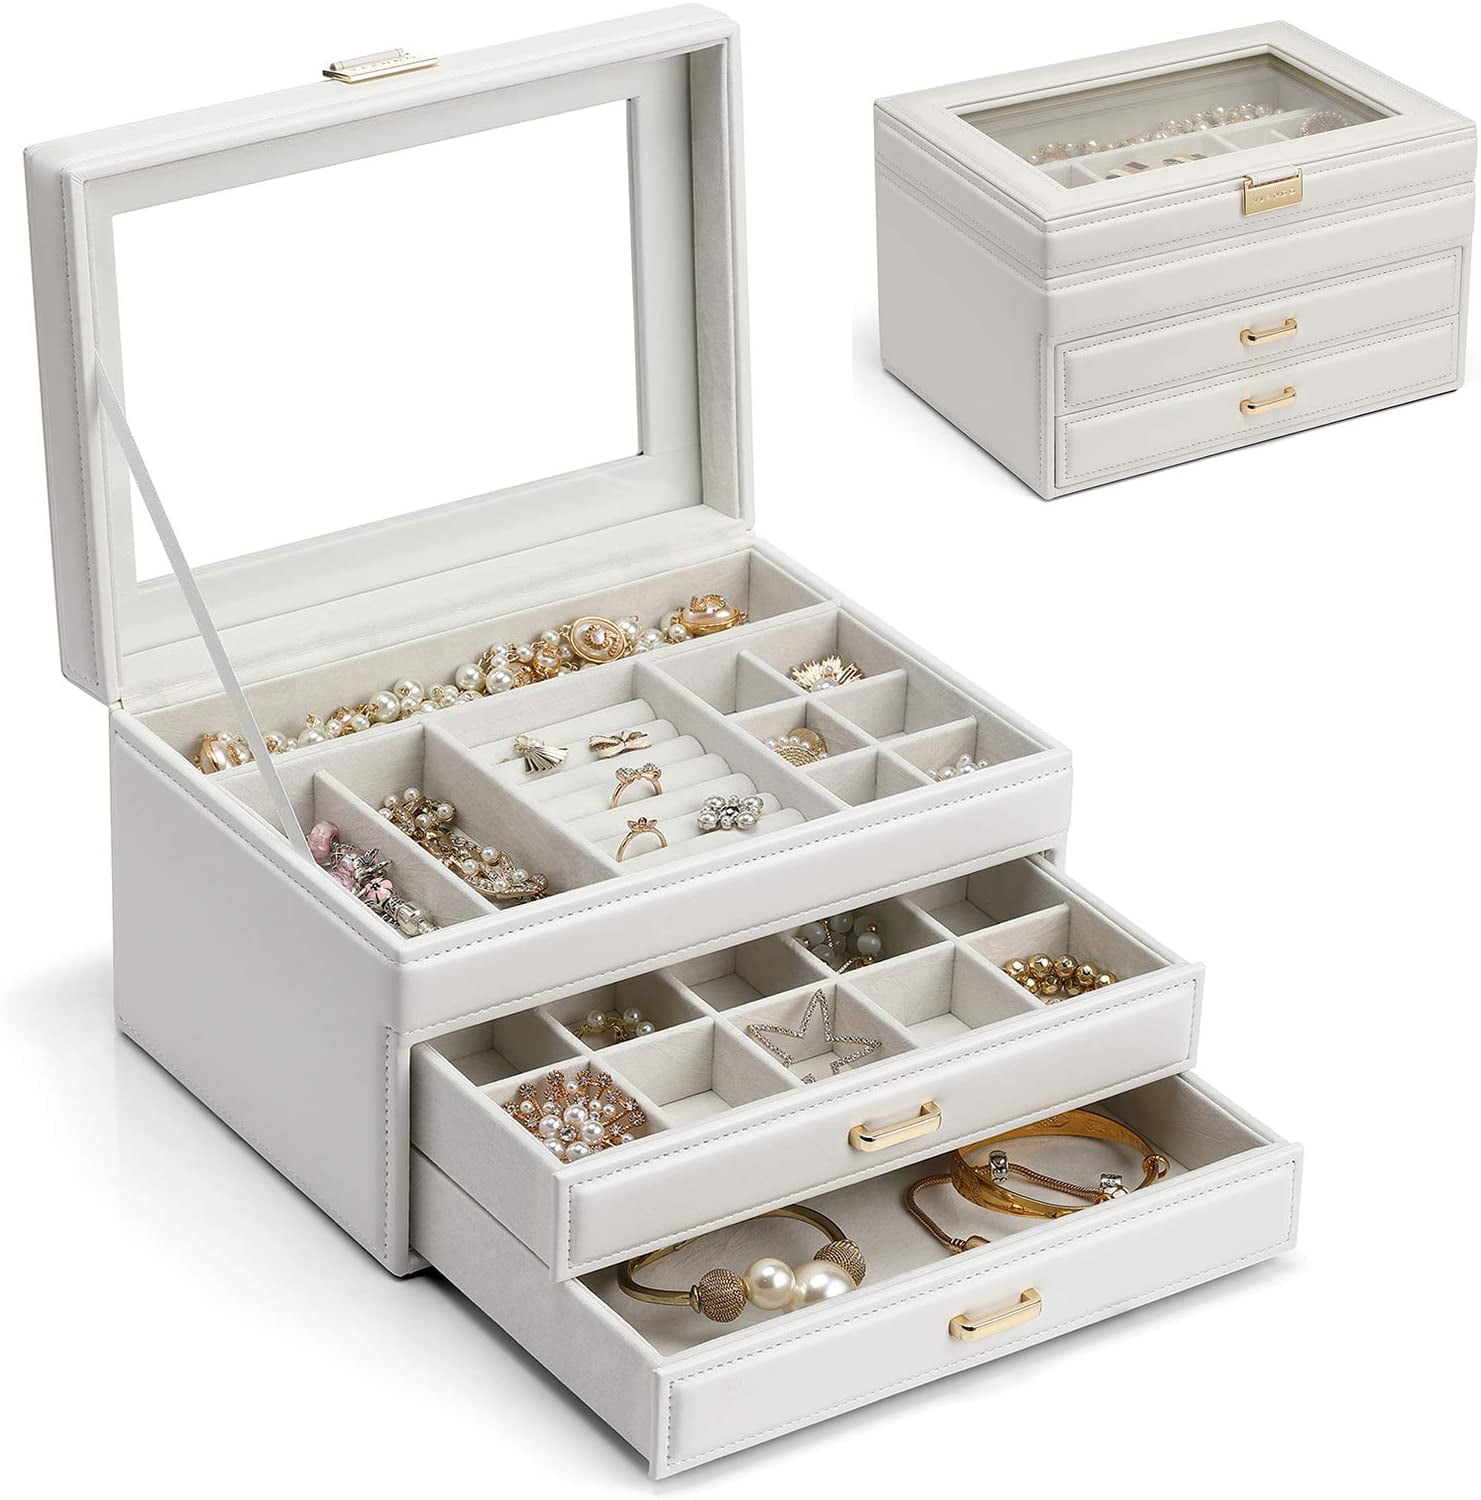 Details about   White Jewelry Box Necklace Rings Storage Organizer Travel Leather Gift Case 